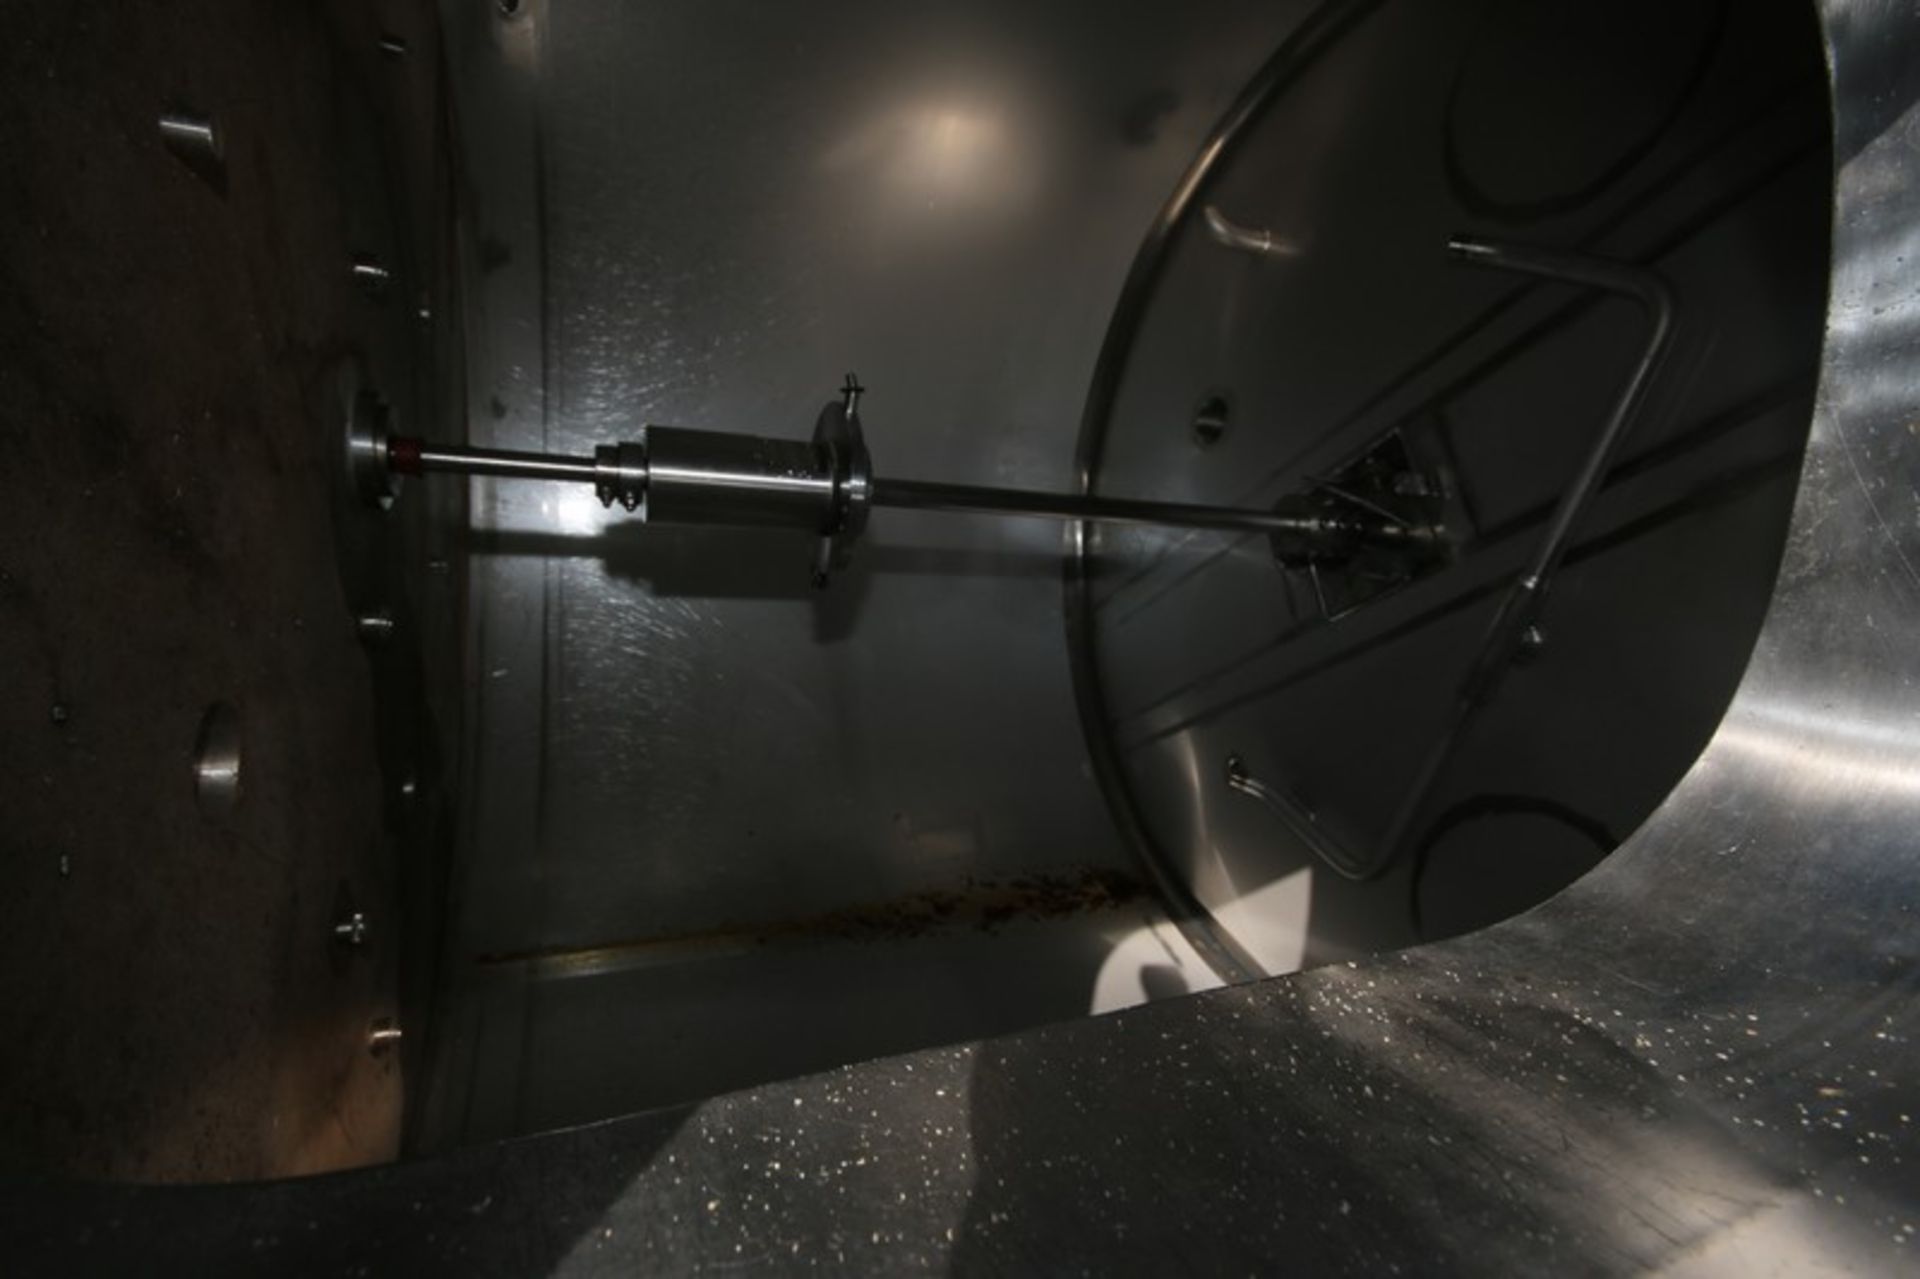 Munker/Braulogistik 15hL Combination Mash Tun/Kettle, M/N Brewhouse, S/N 1, 208 Volts, 3 Phase, with - Image 11 of 24